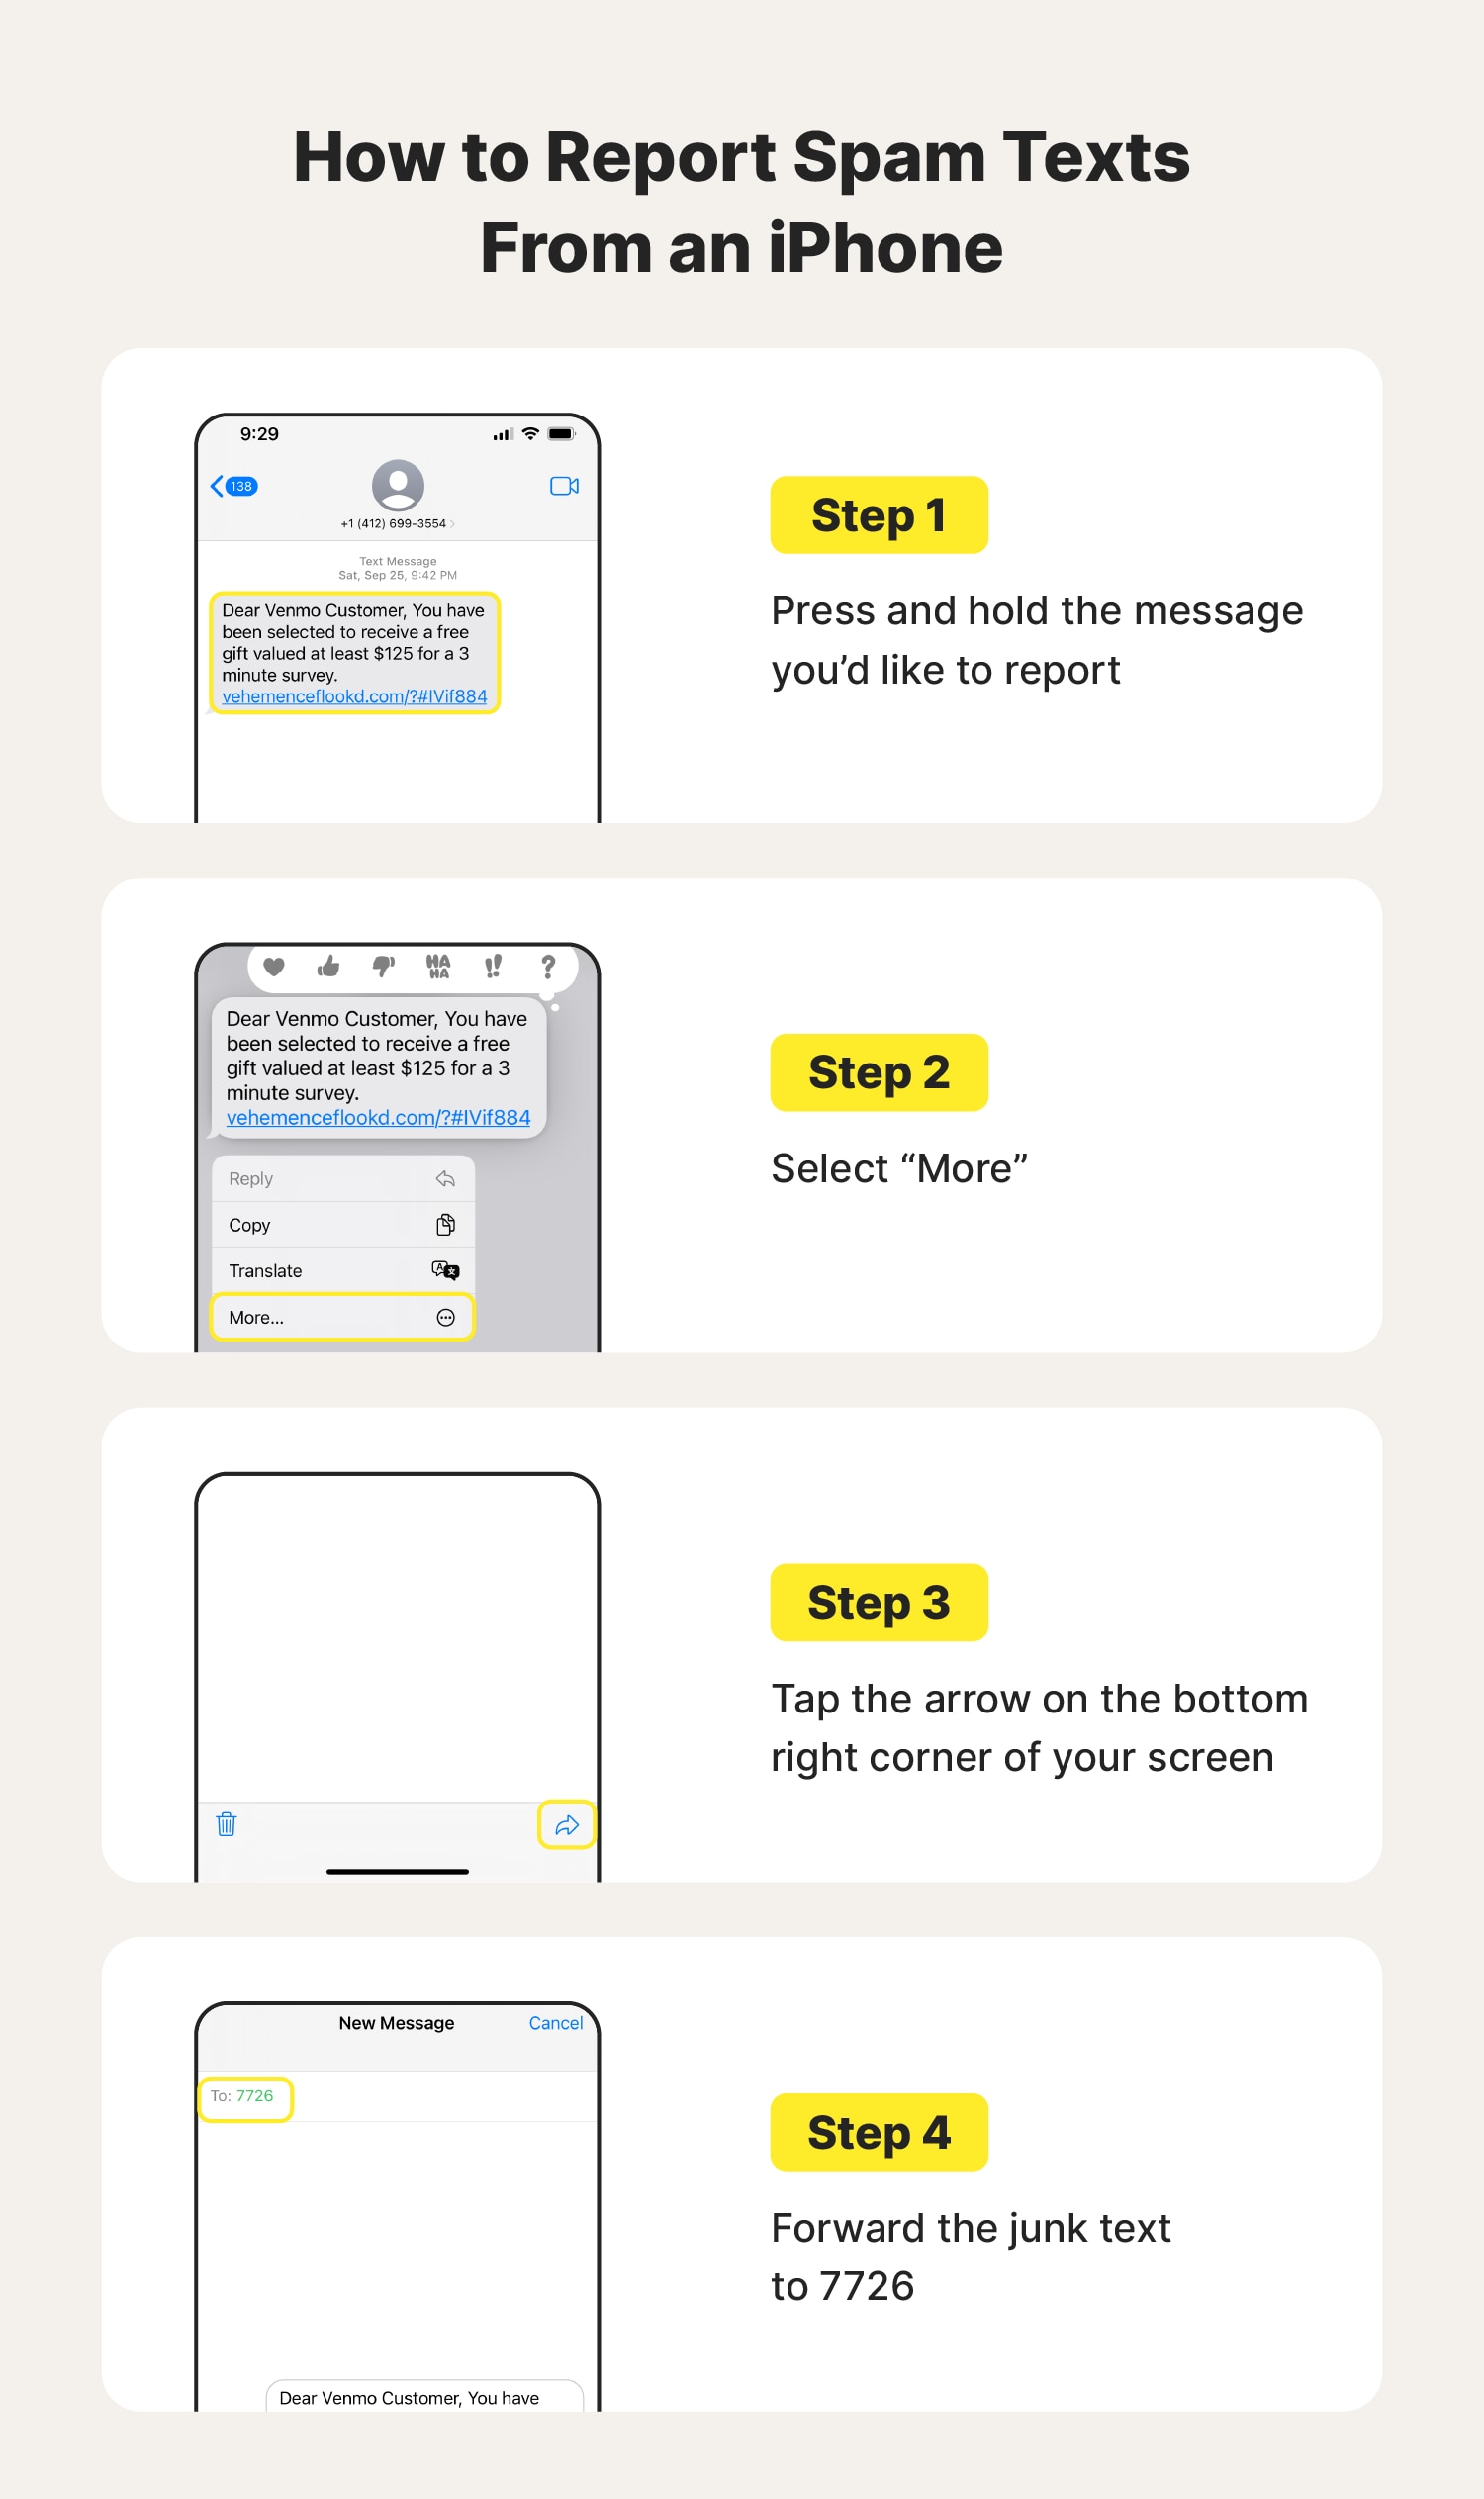 Step-by-step visual instructions on how to report spam texts on an iPhone.